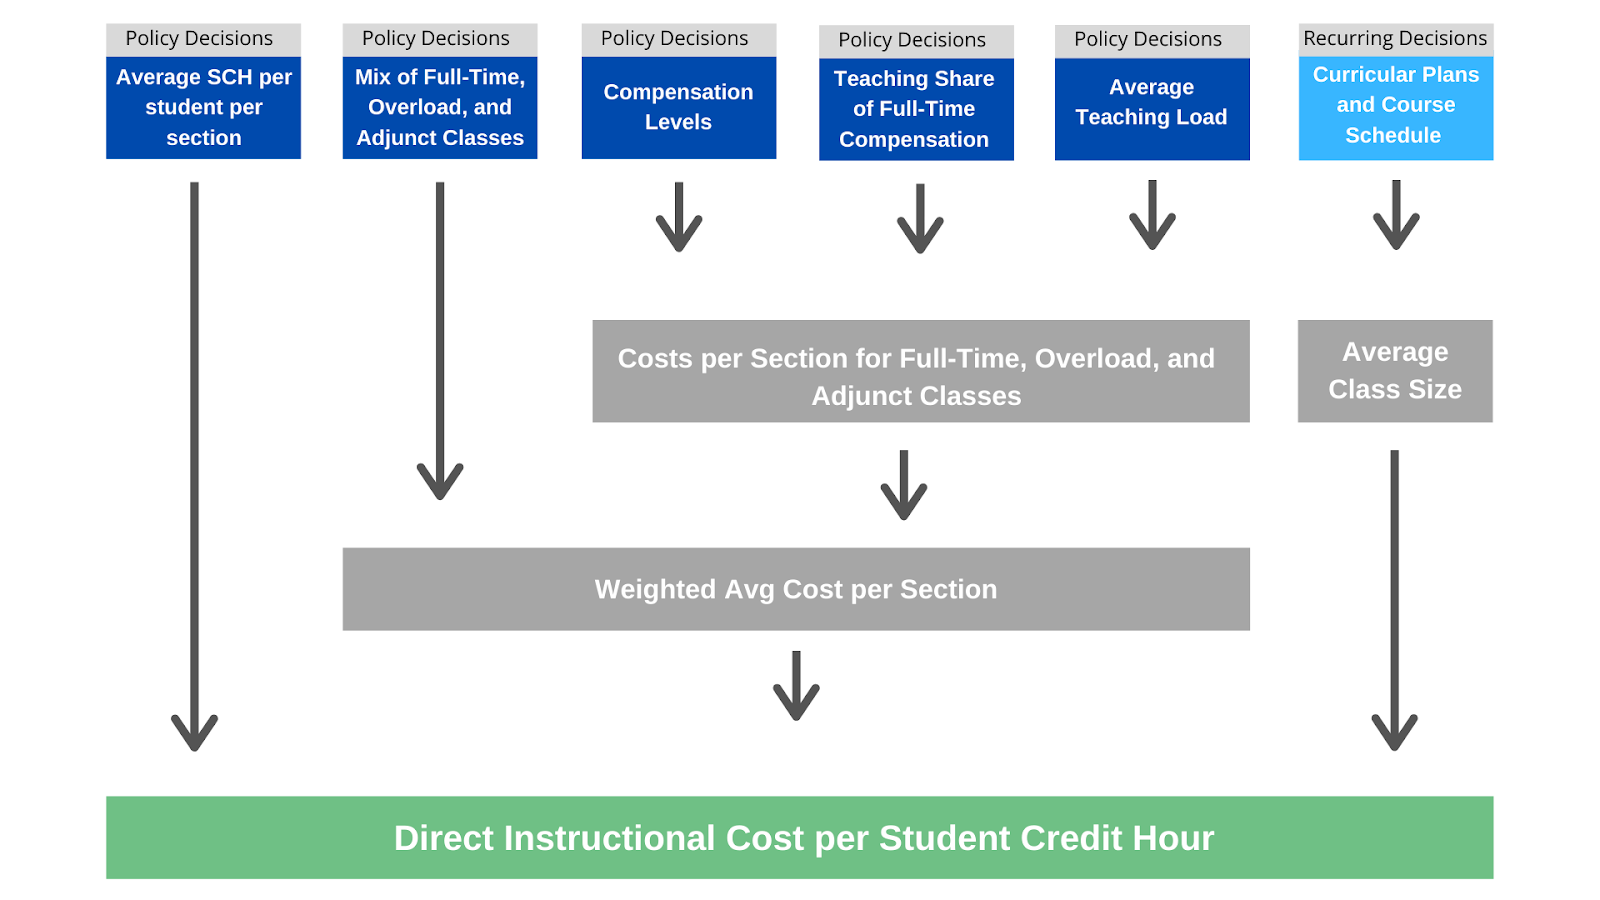 This diagram illustrates the decisions that lead to direct instructional cost